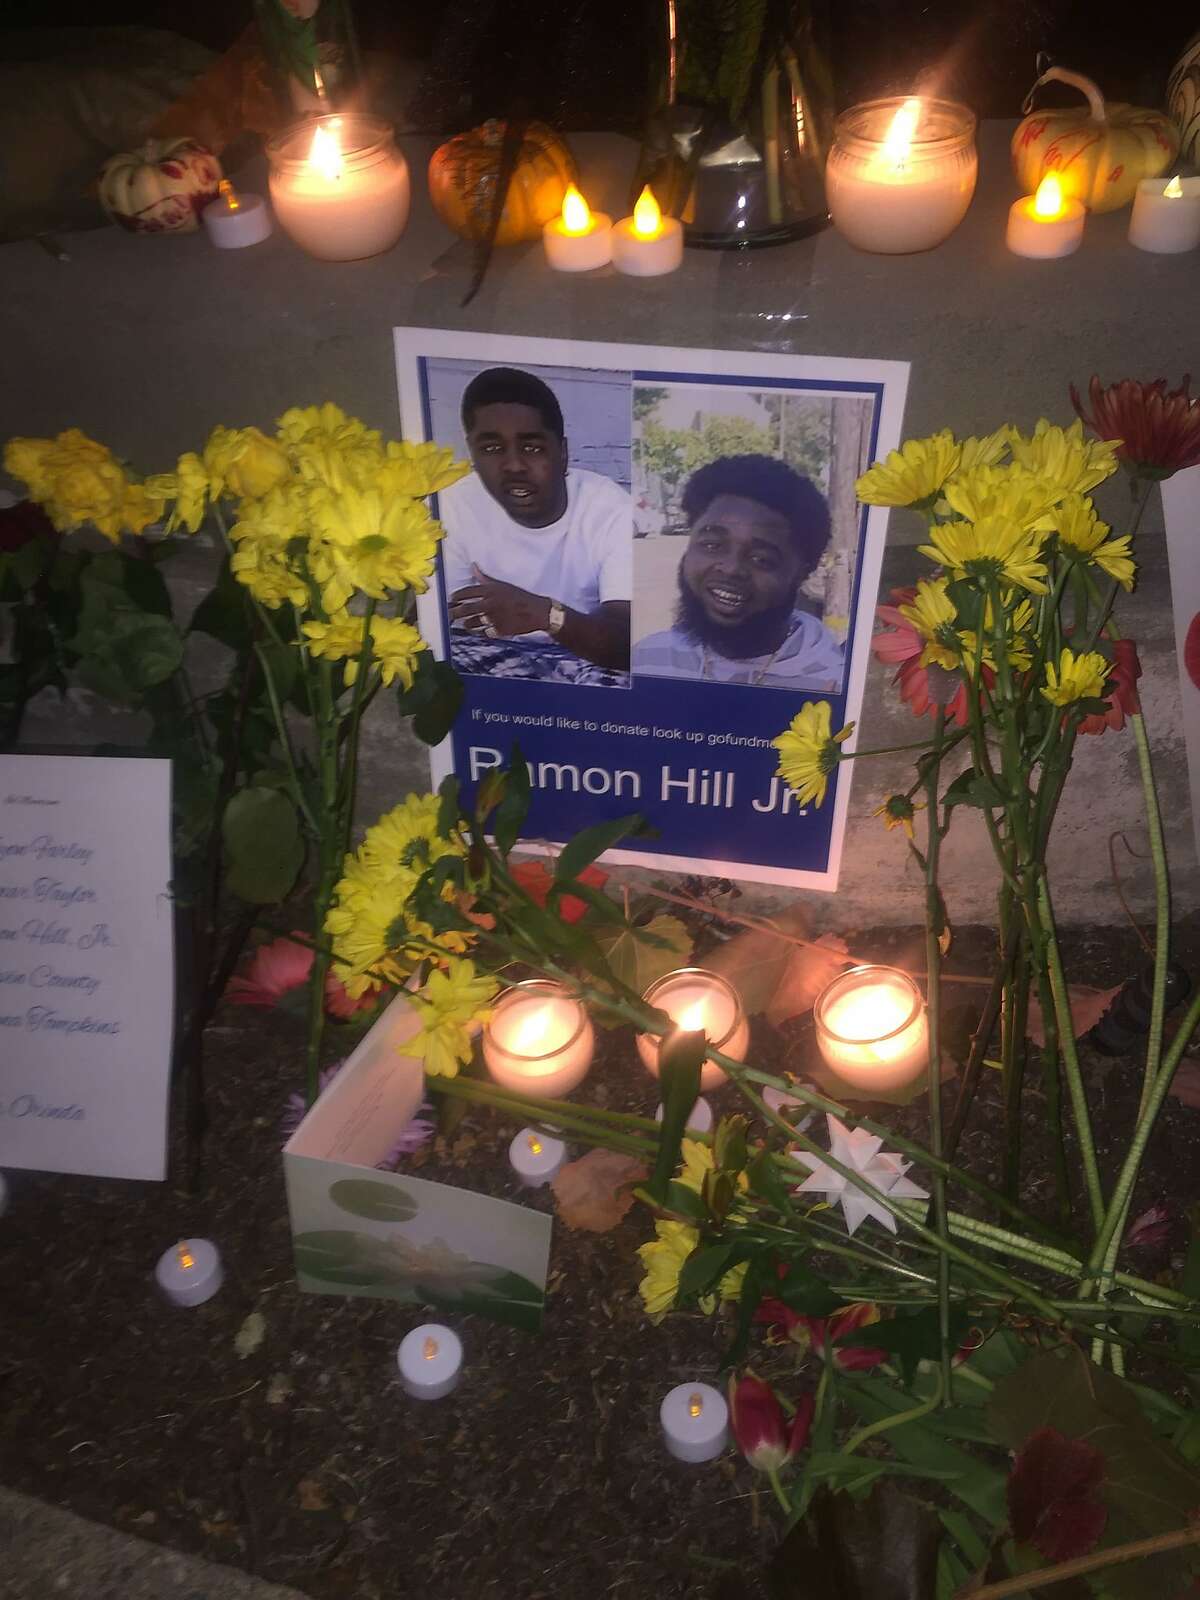 A spontaneous memorial has been placed outside the location in Orinda, Calif. where Raymon Hill Jr. was shot to death Halloween evening, while attending a party hosted in an AirBnB short-term rental home. Hill and three other people lost their lives that evening.